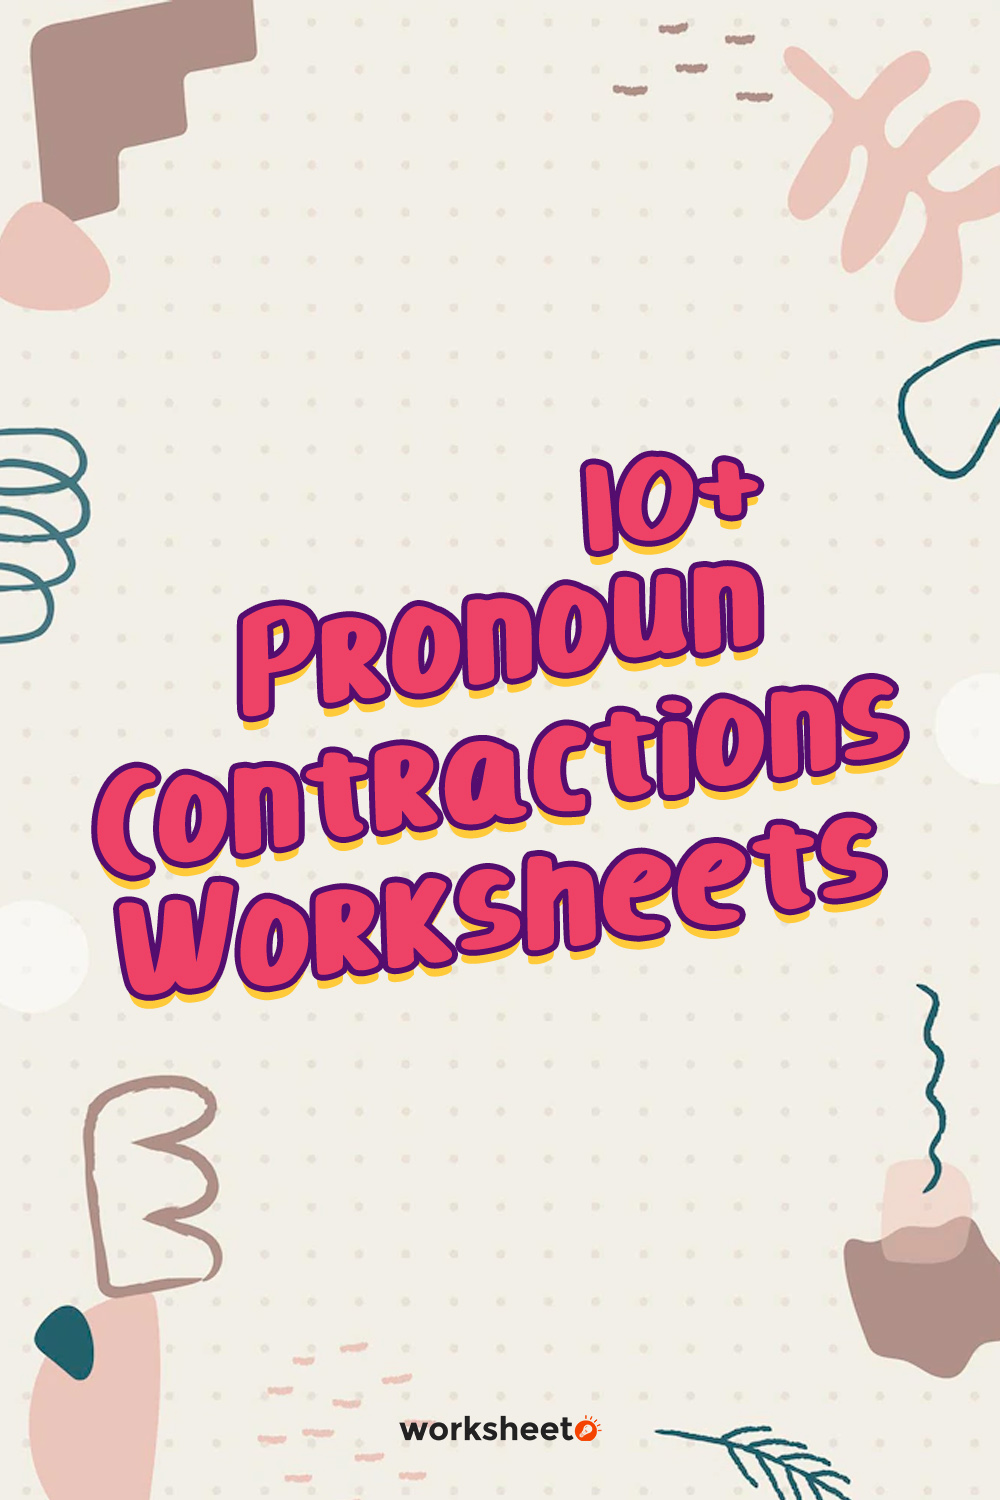 15 Images of Pronoun Contractions Worksheets